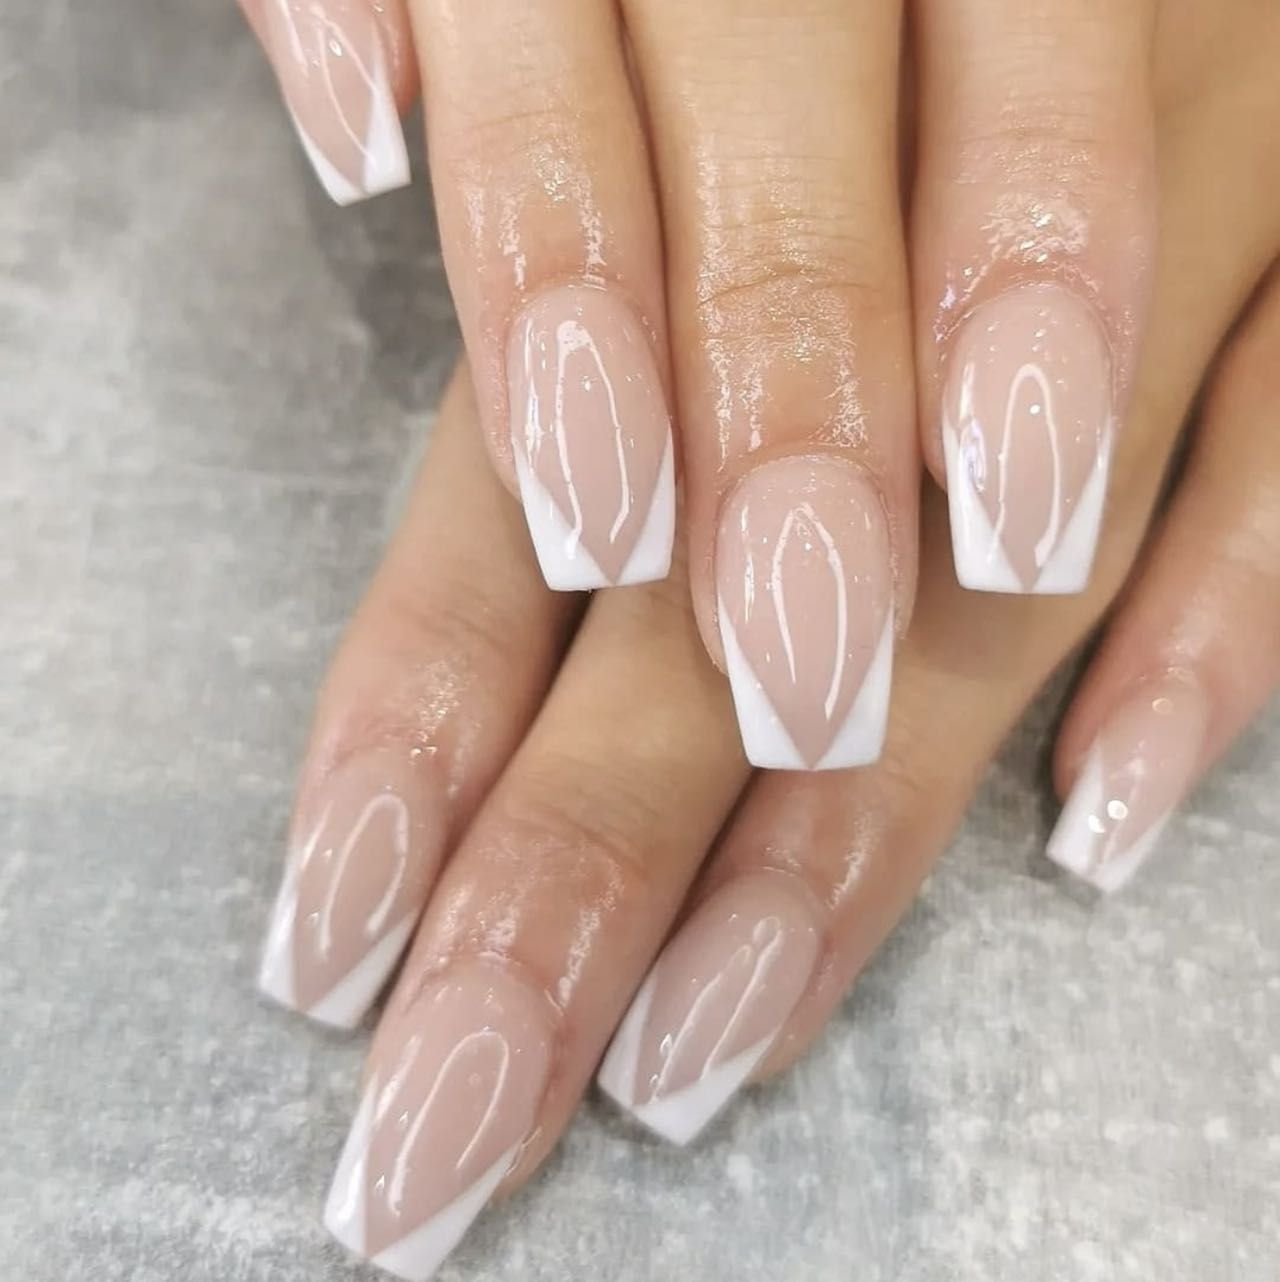 Sculptured acrylic nails with French manicure portfolio